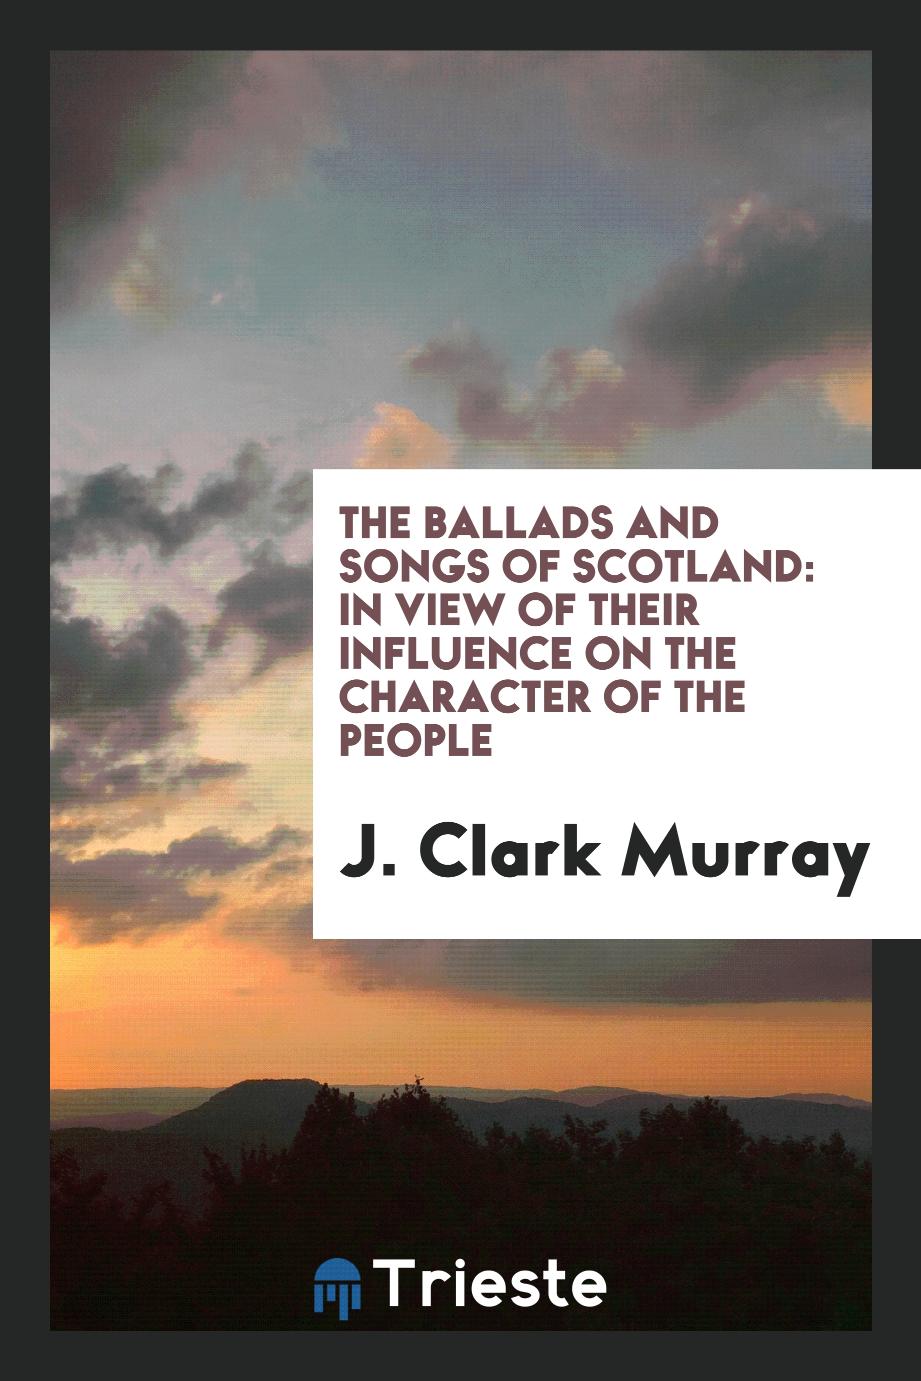 The Ballads and Songs of Scotland: In View of Their Influence on the Character of the People